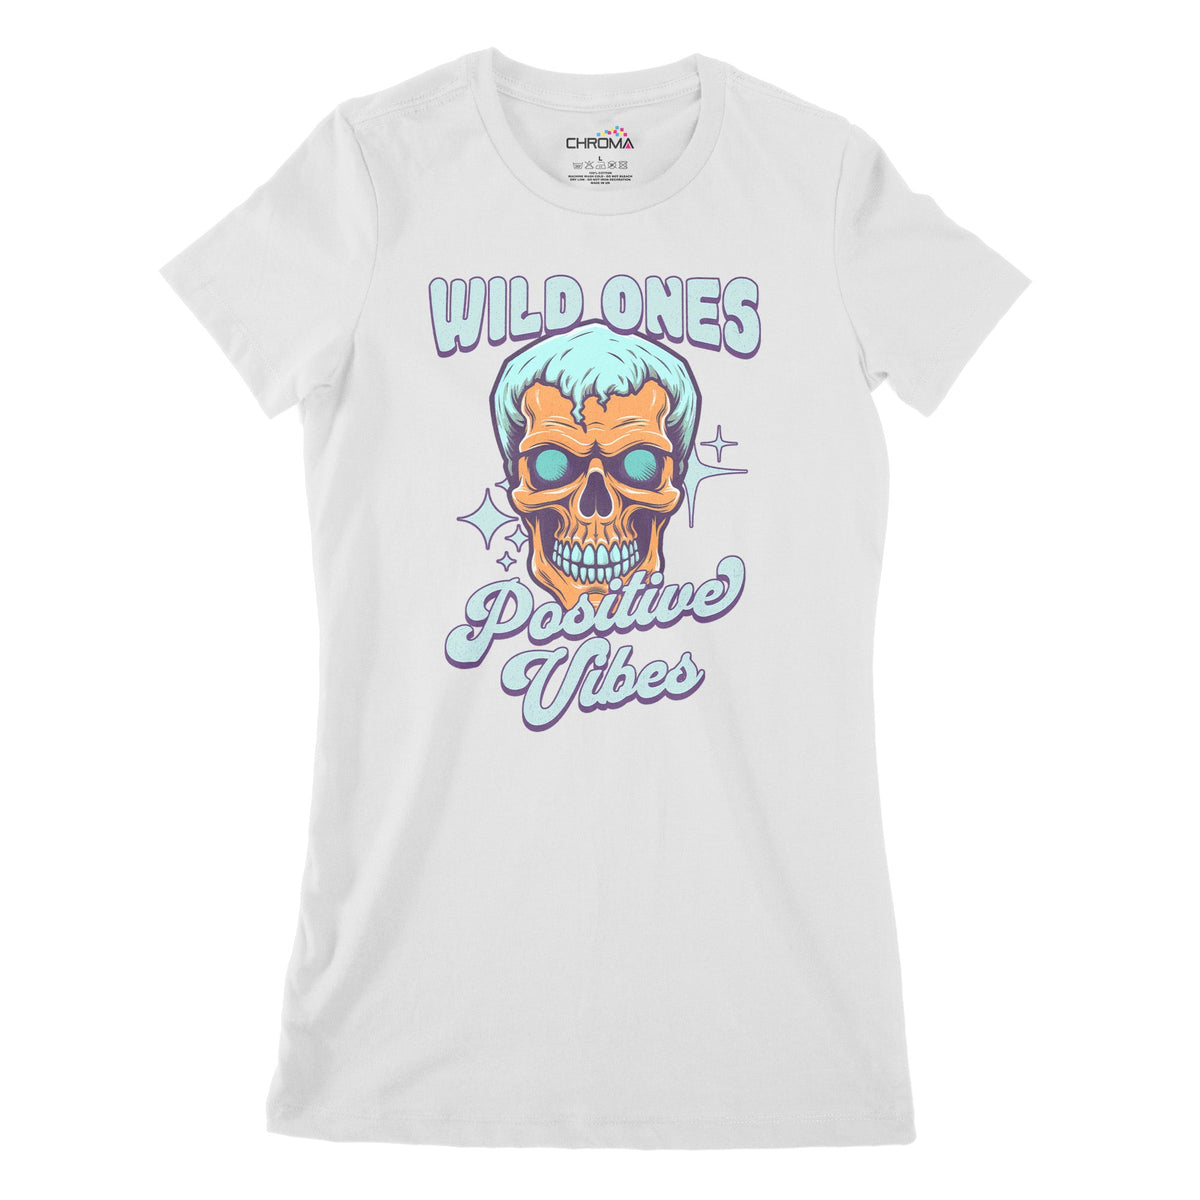 Wild Ones Positive Vibes Women's Classic Fitted T-Shirt Chroma Clothing